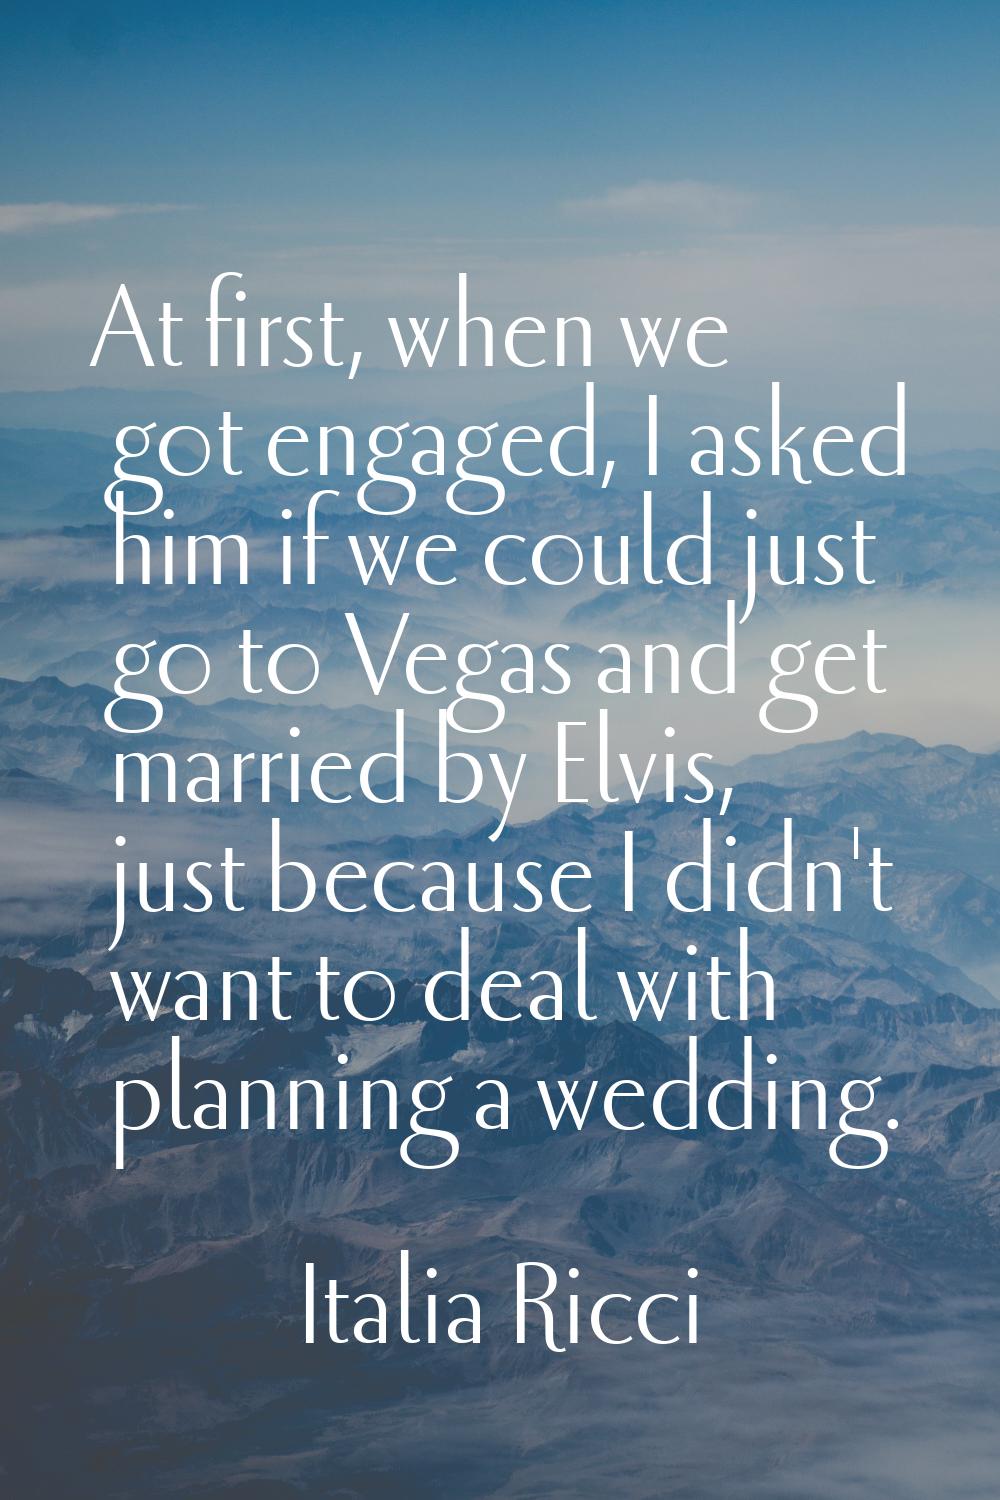 At first, when we got engaged, I asked him if we could just go to Vegas and get married by Elvis, j